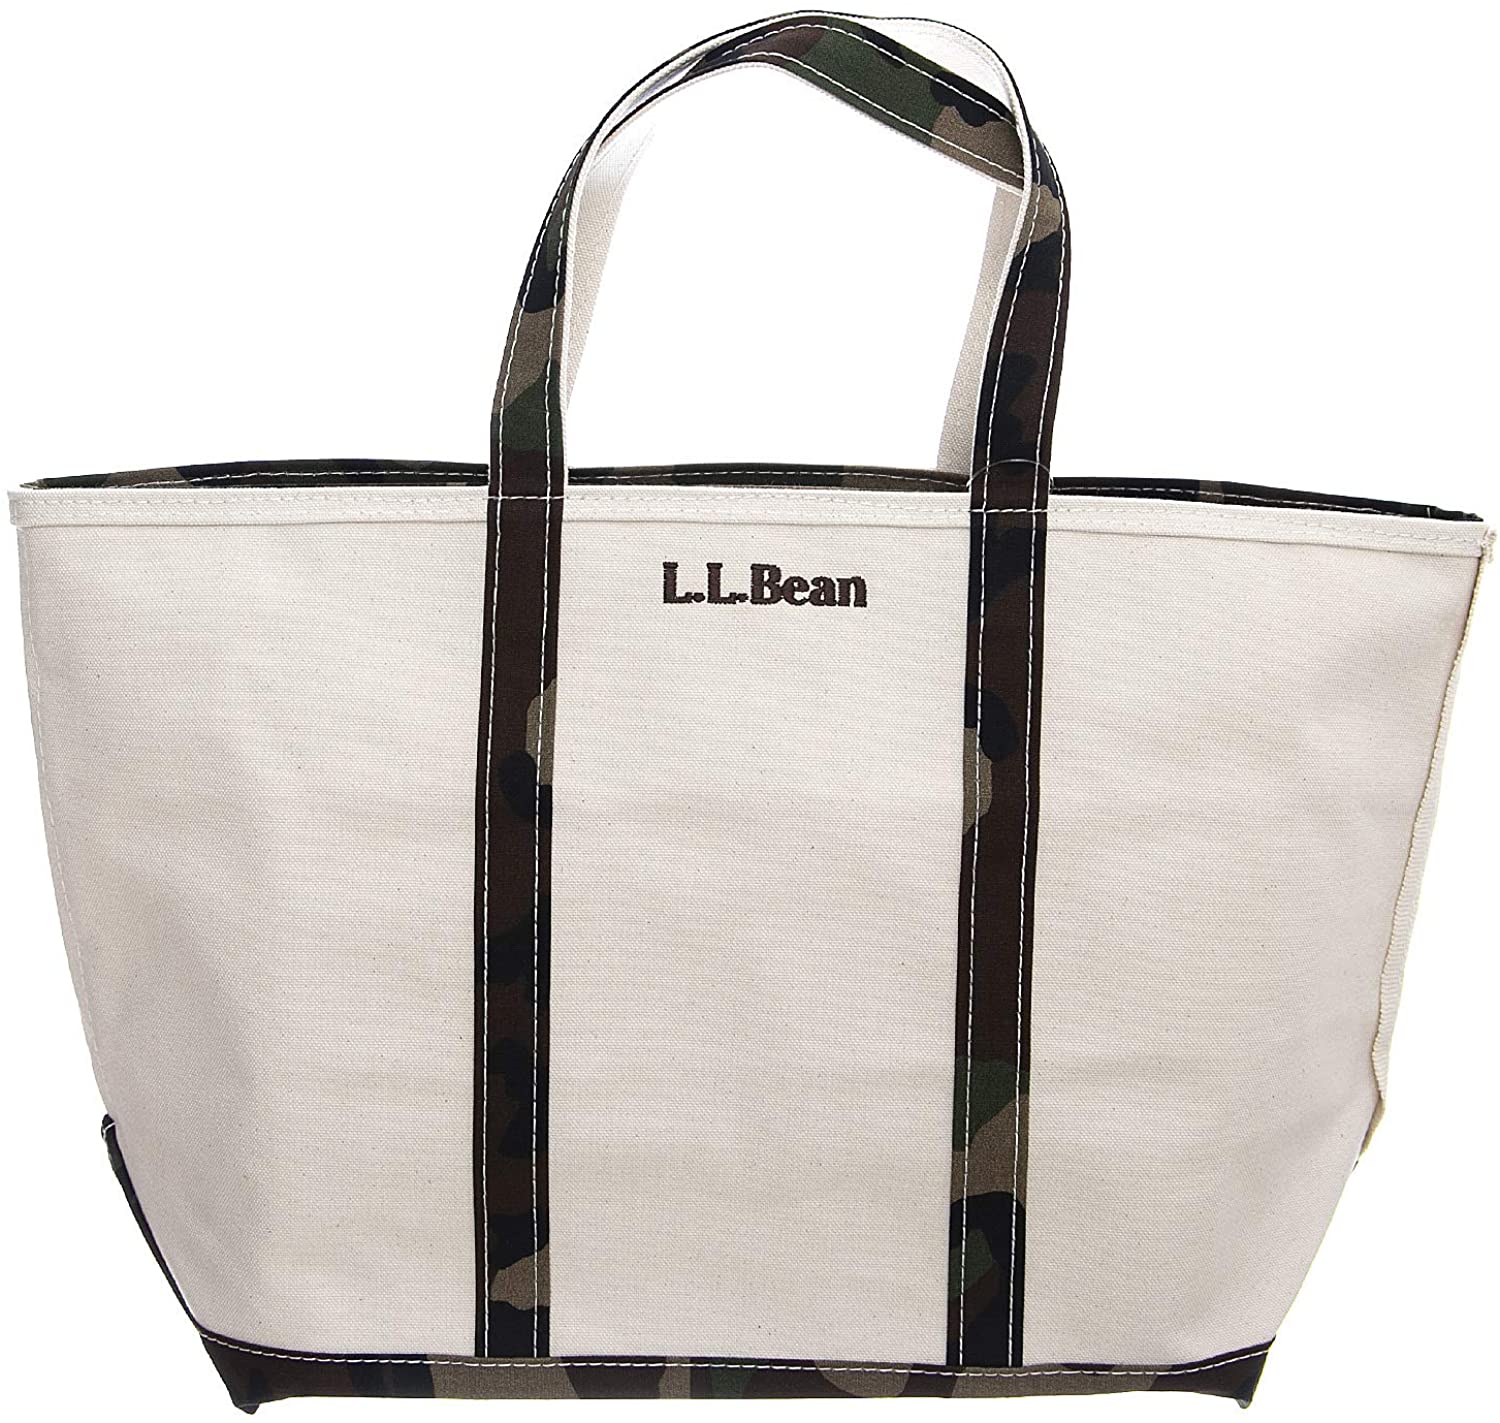 Zip-Top Boat and Tote Bag, The 50 Best and Enticing Gifts for Grandparents in 2022